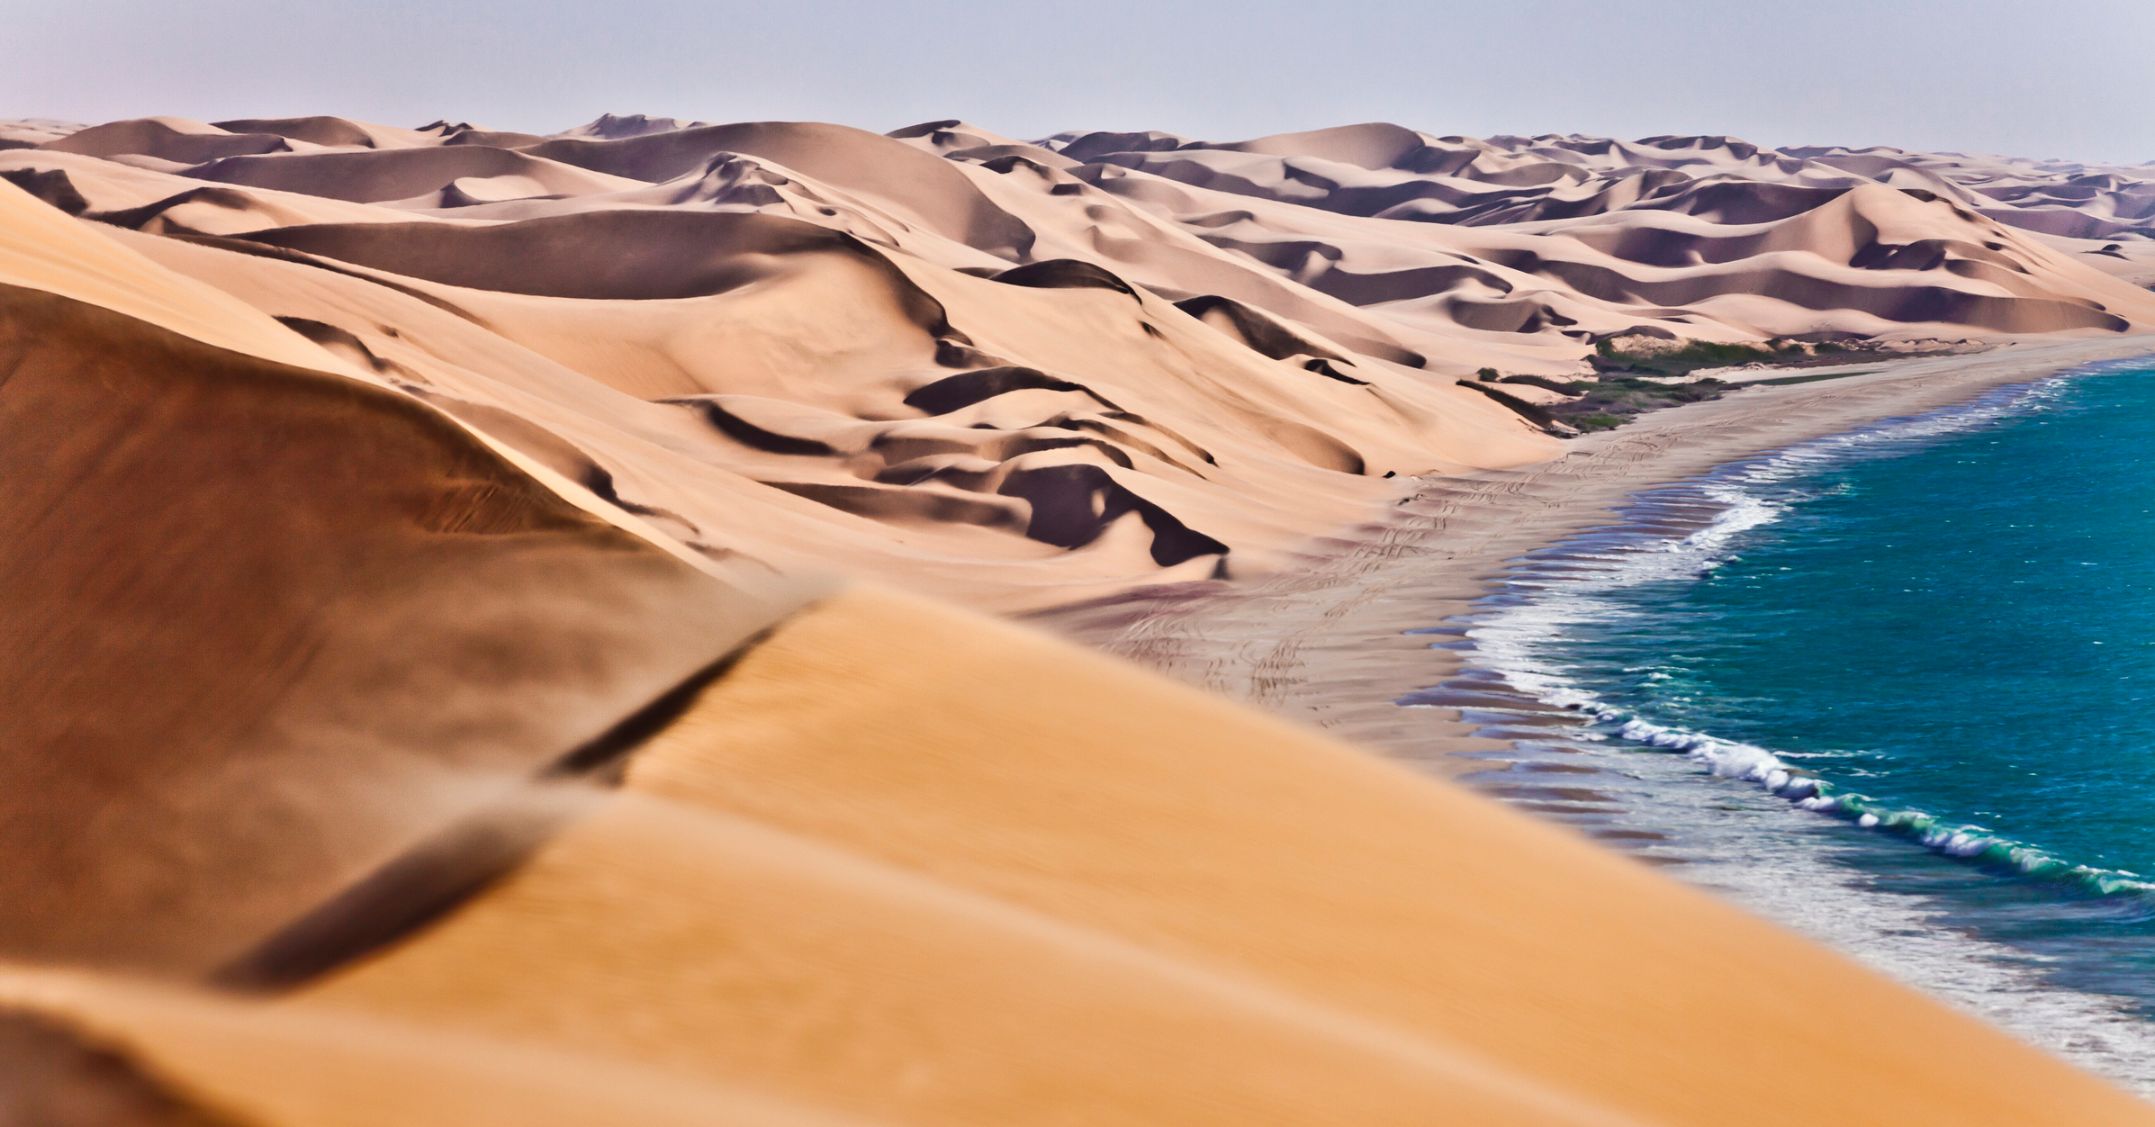 10 Facts About the Namib Sand Dunes - On The Go Tours Blog